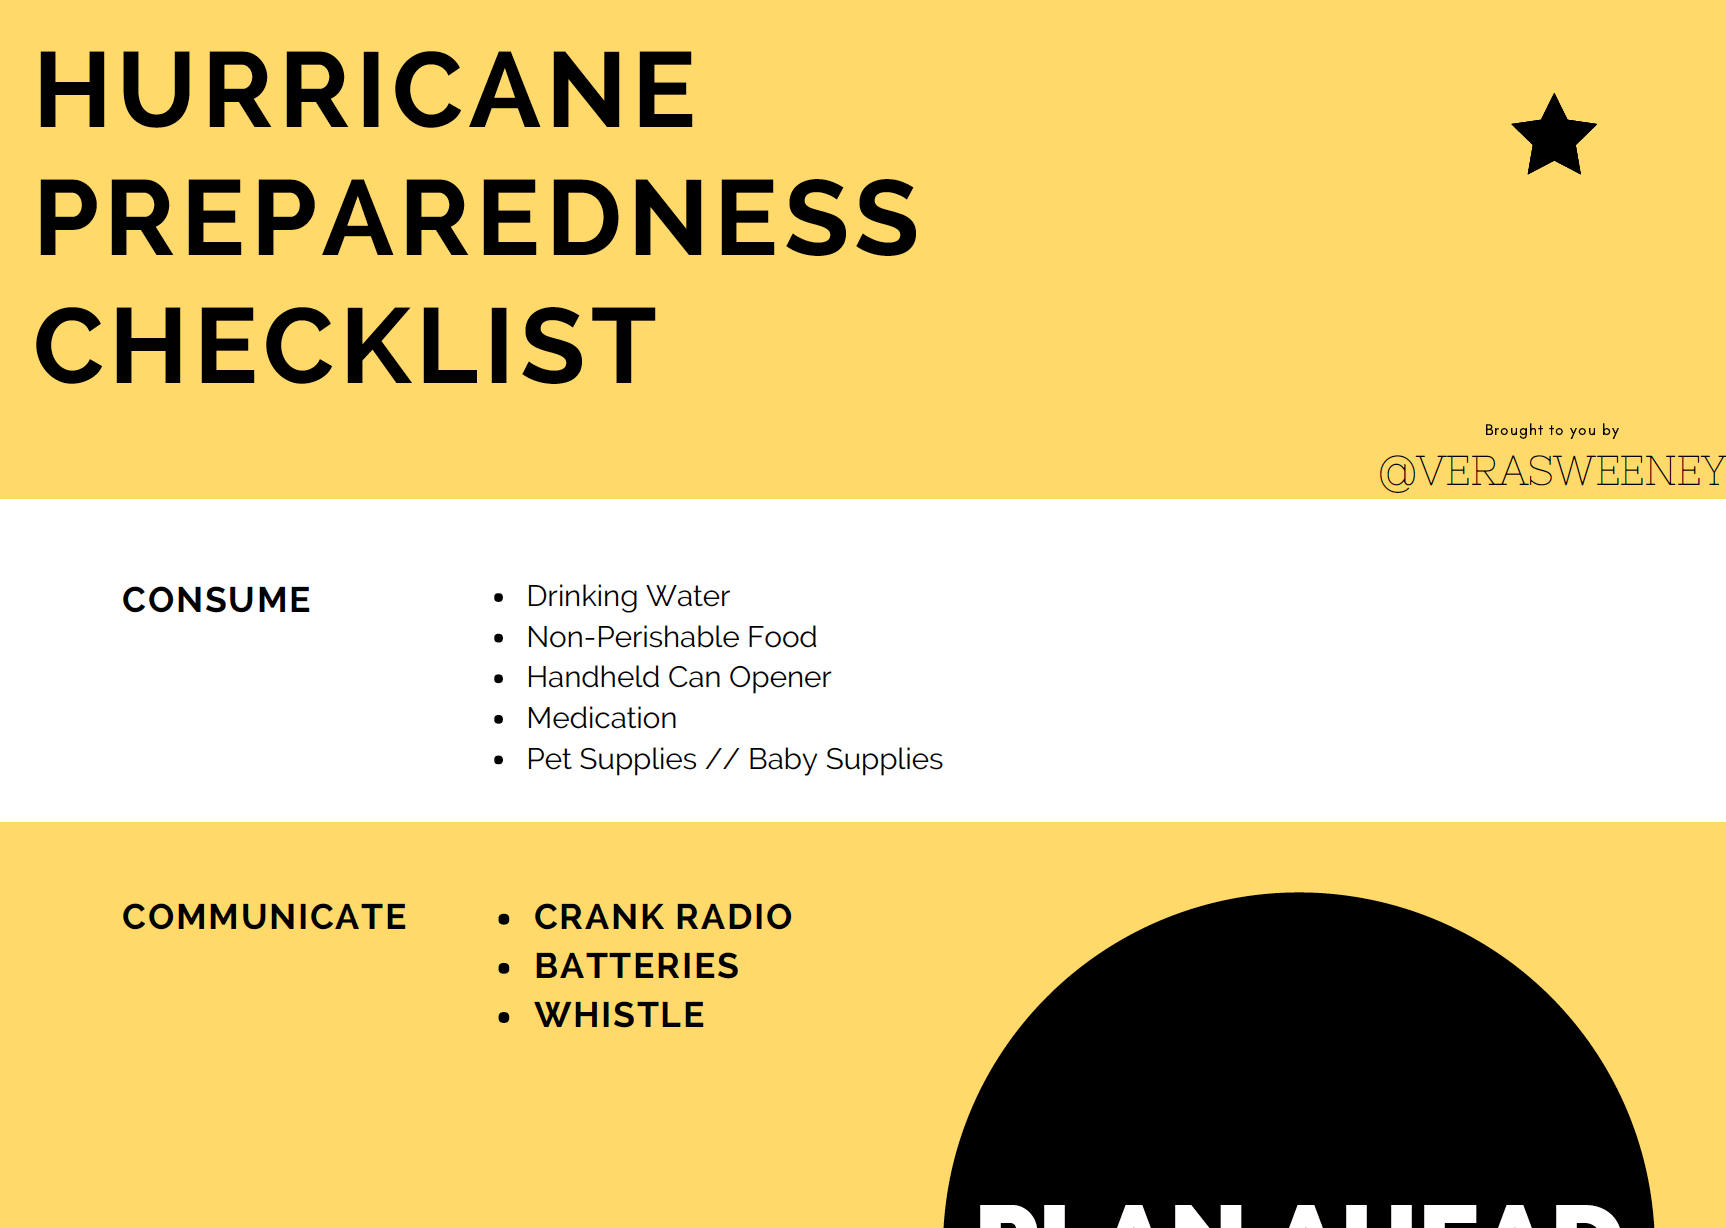 Hurricane Preparedness Checklist: Must-Have Items To Help Your Family Weather The Storm